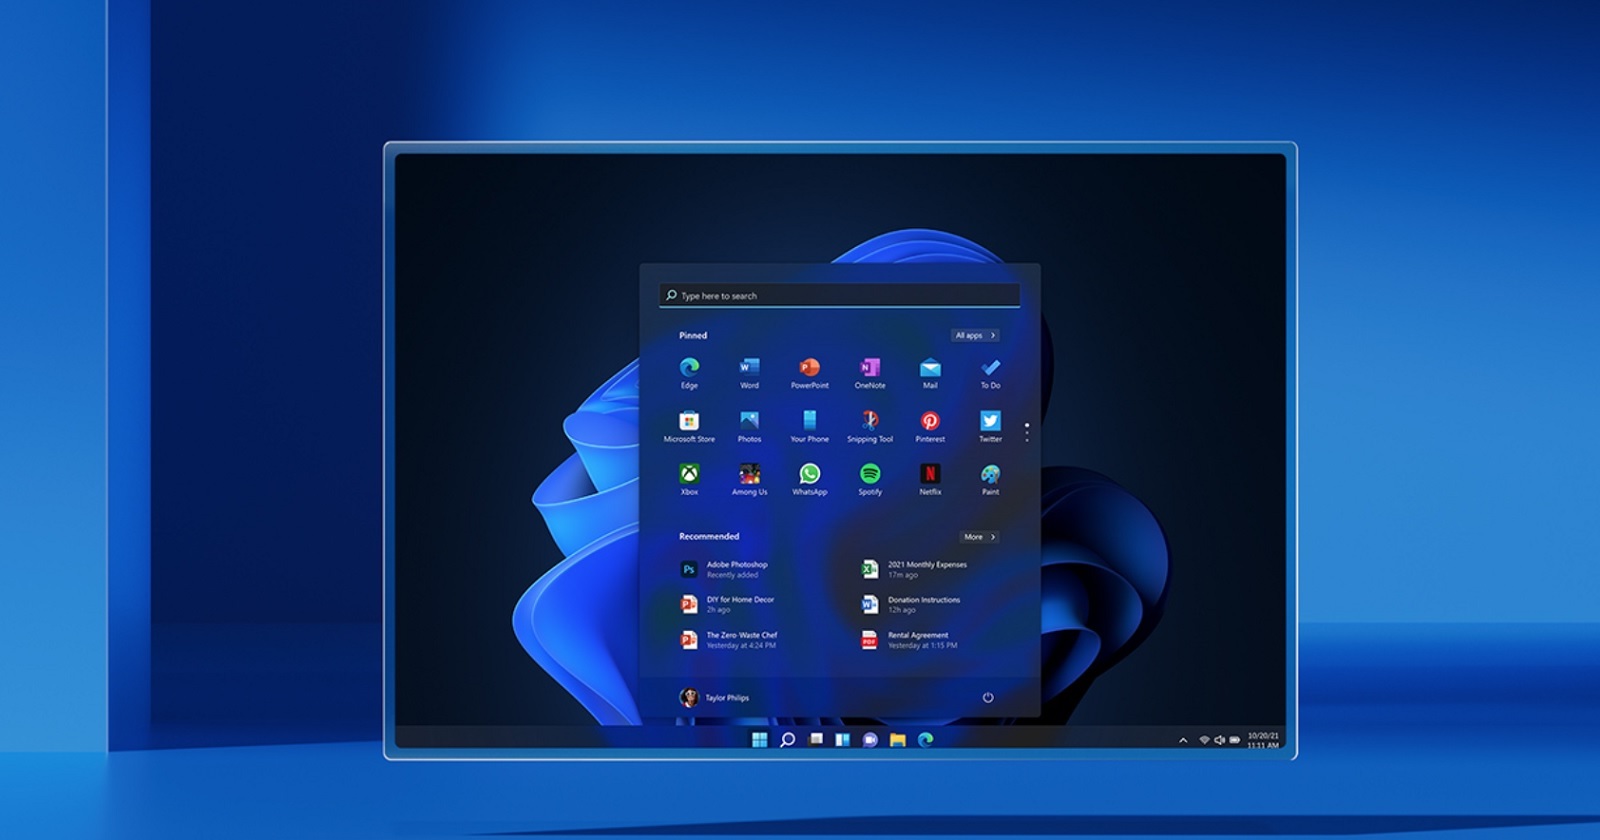 Windows 11 23H2 update starts rolling out with Copilot AI